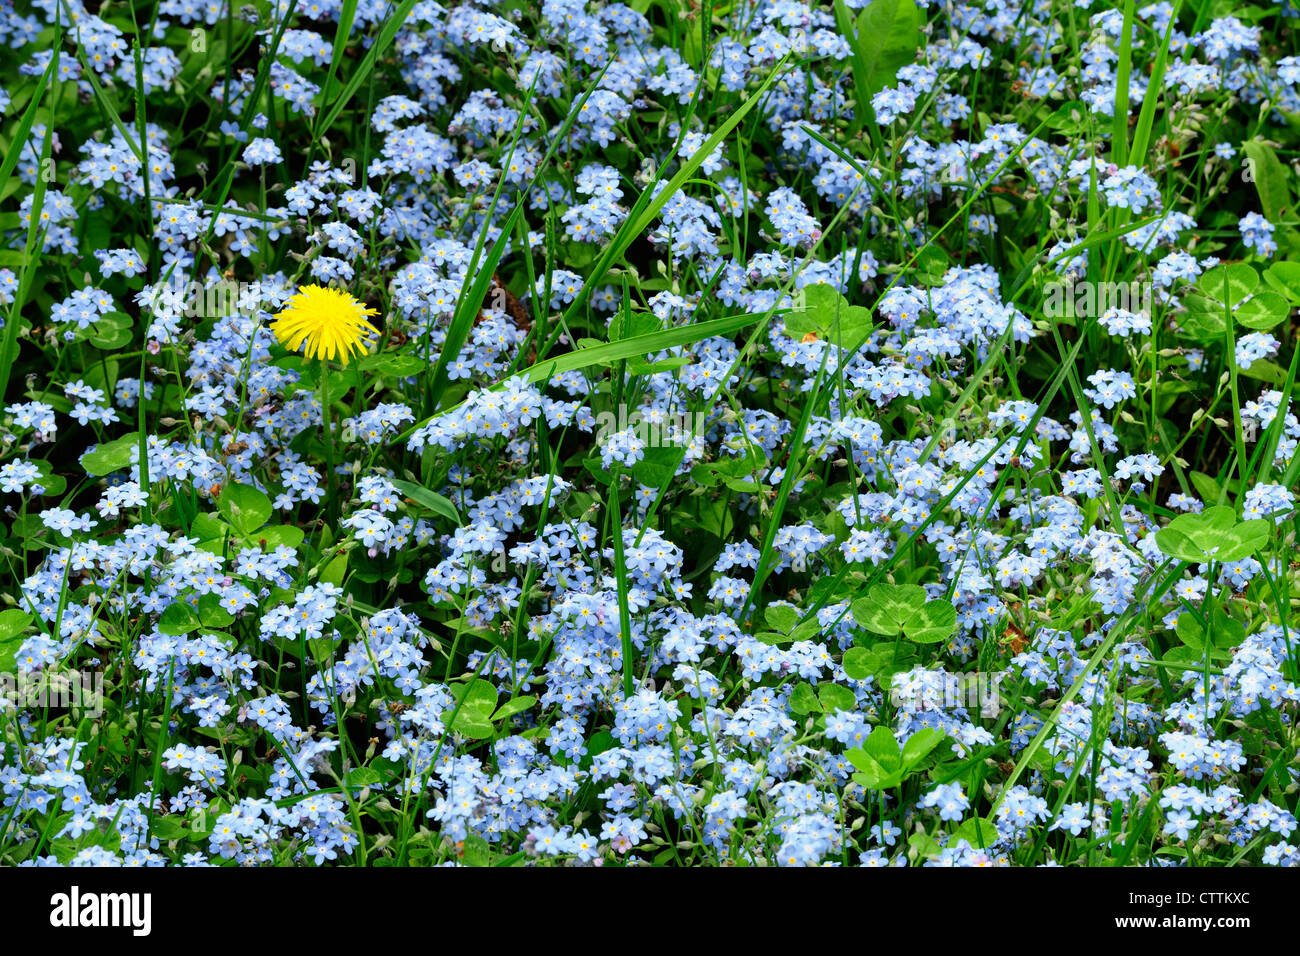 Forget-me-nots, clover and dandelion, Wanup, Ontario, Canada Stock Photo